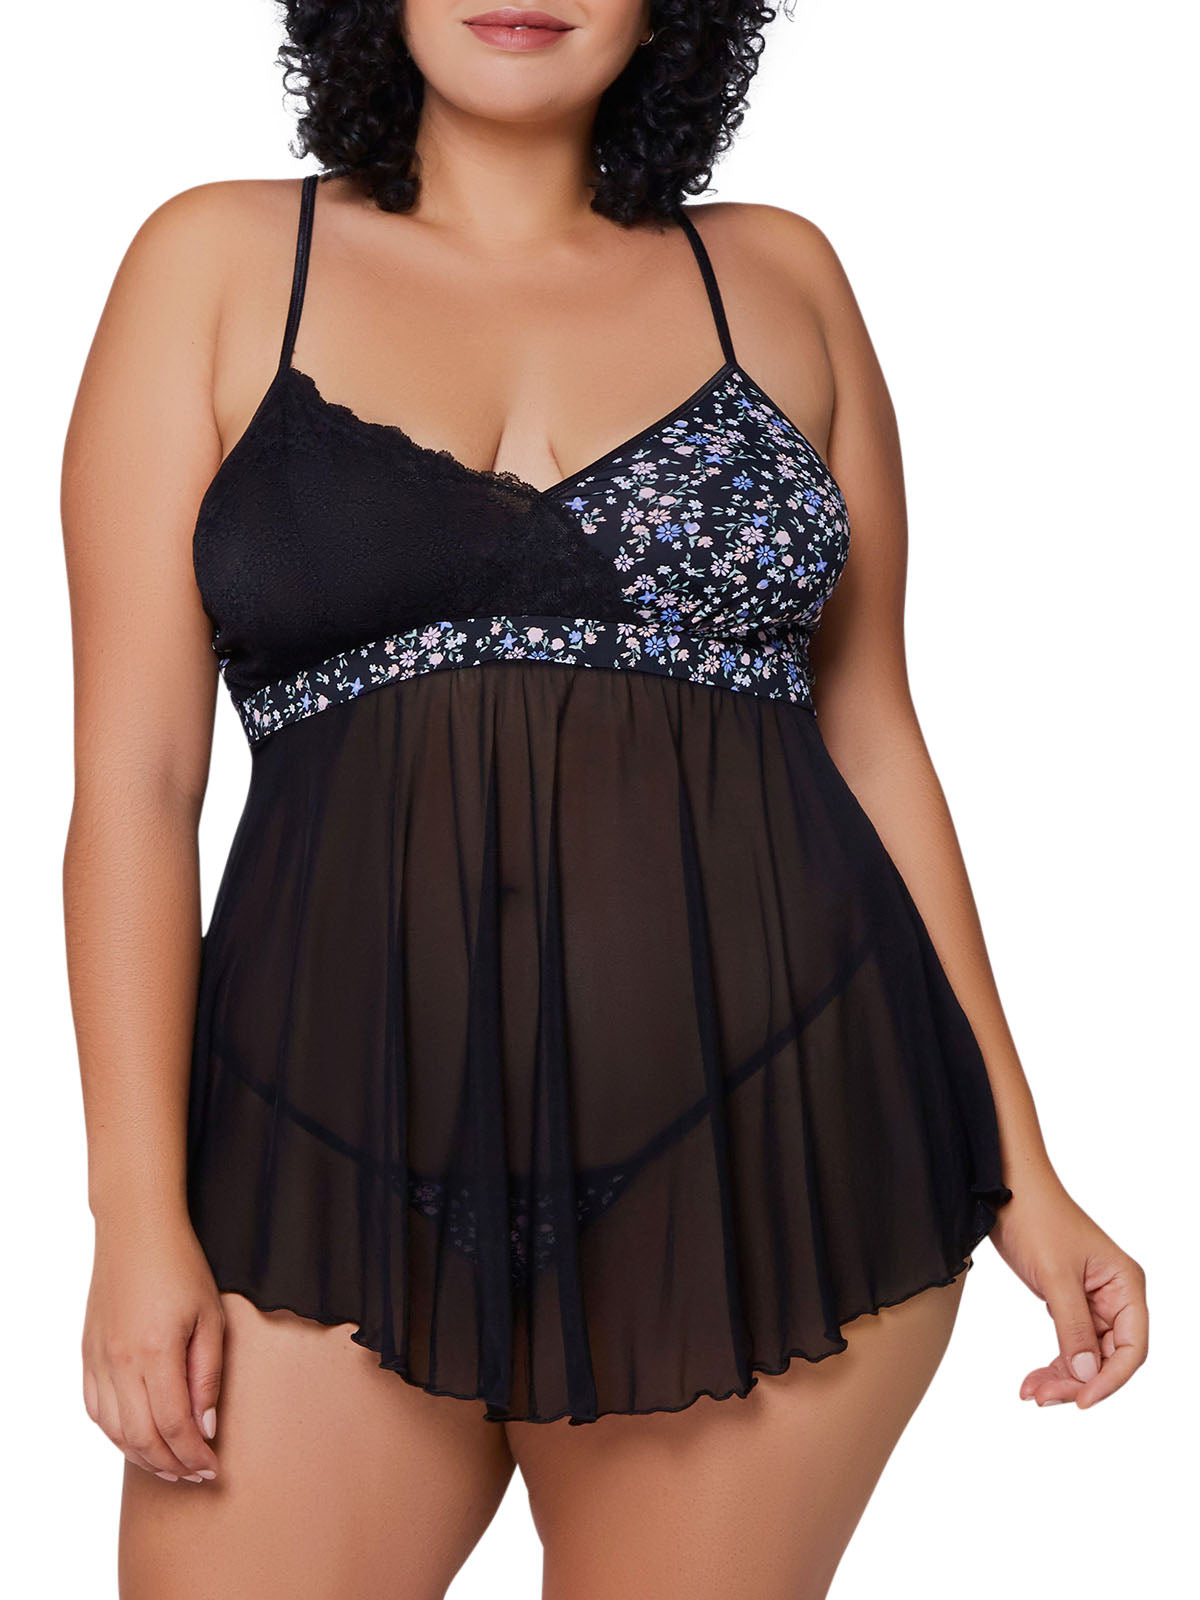 iCollection Babydoll Lingerie Hollyn Plus Size Babydoll